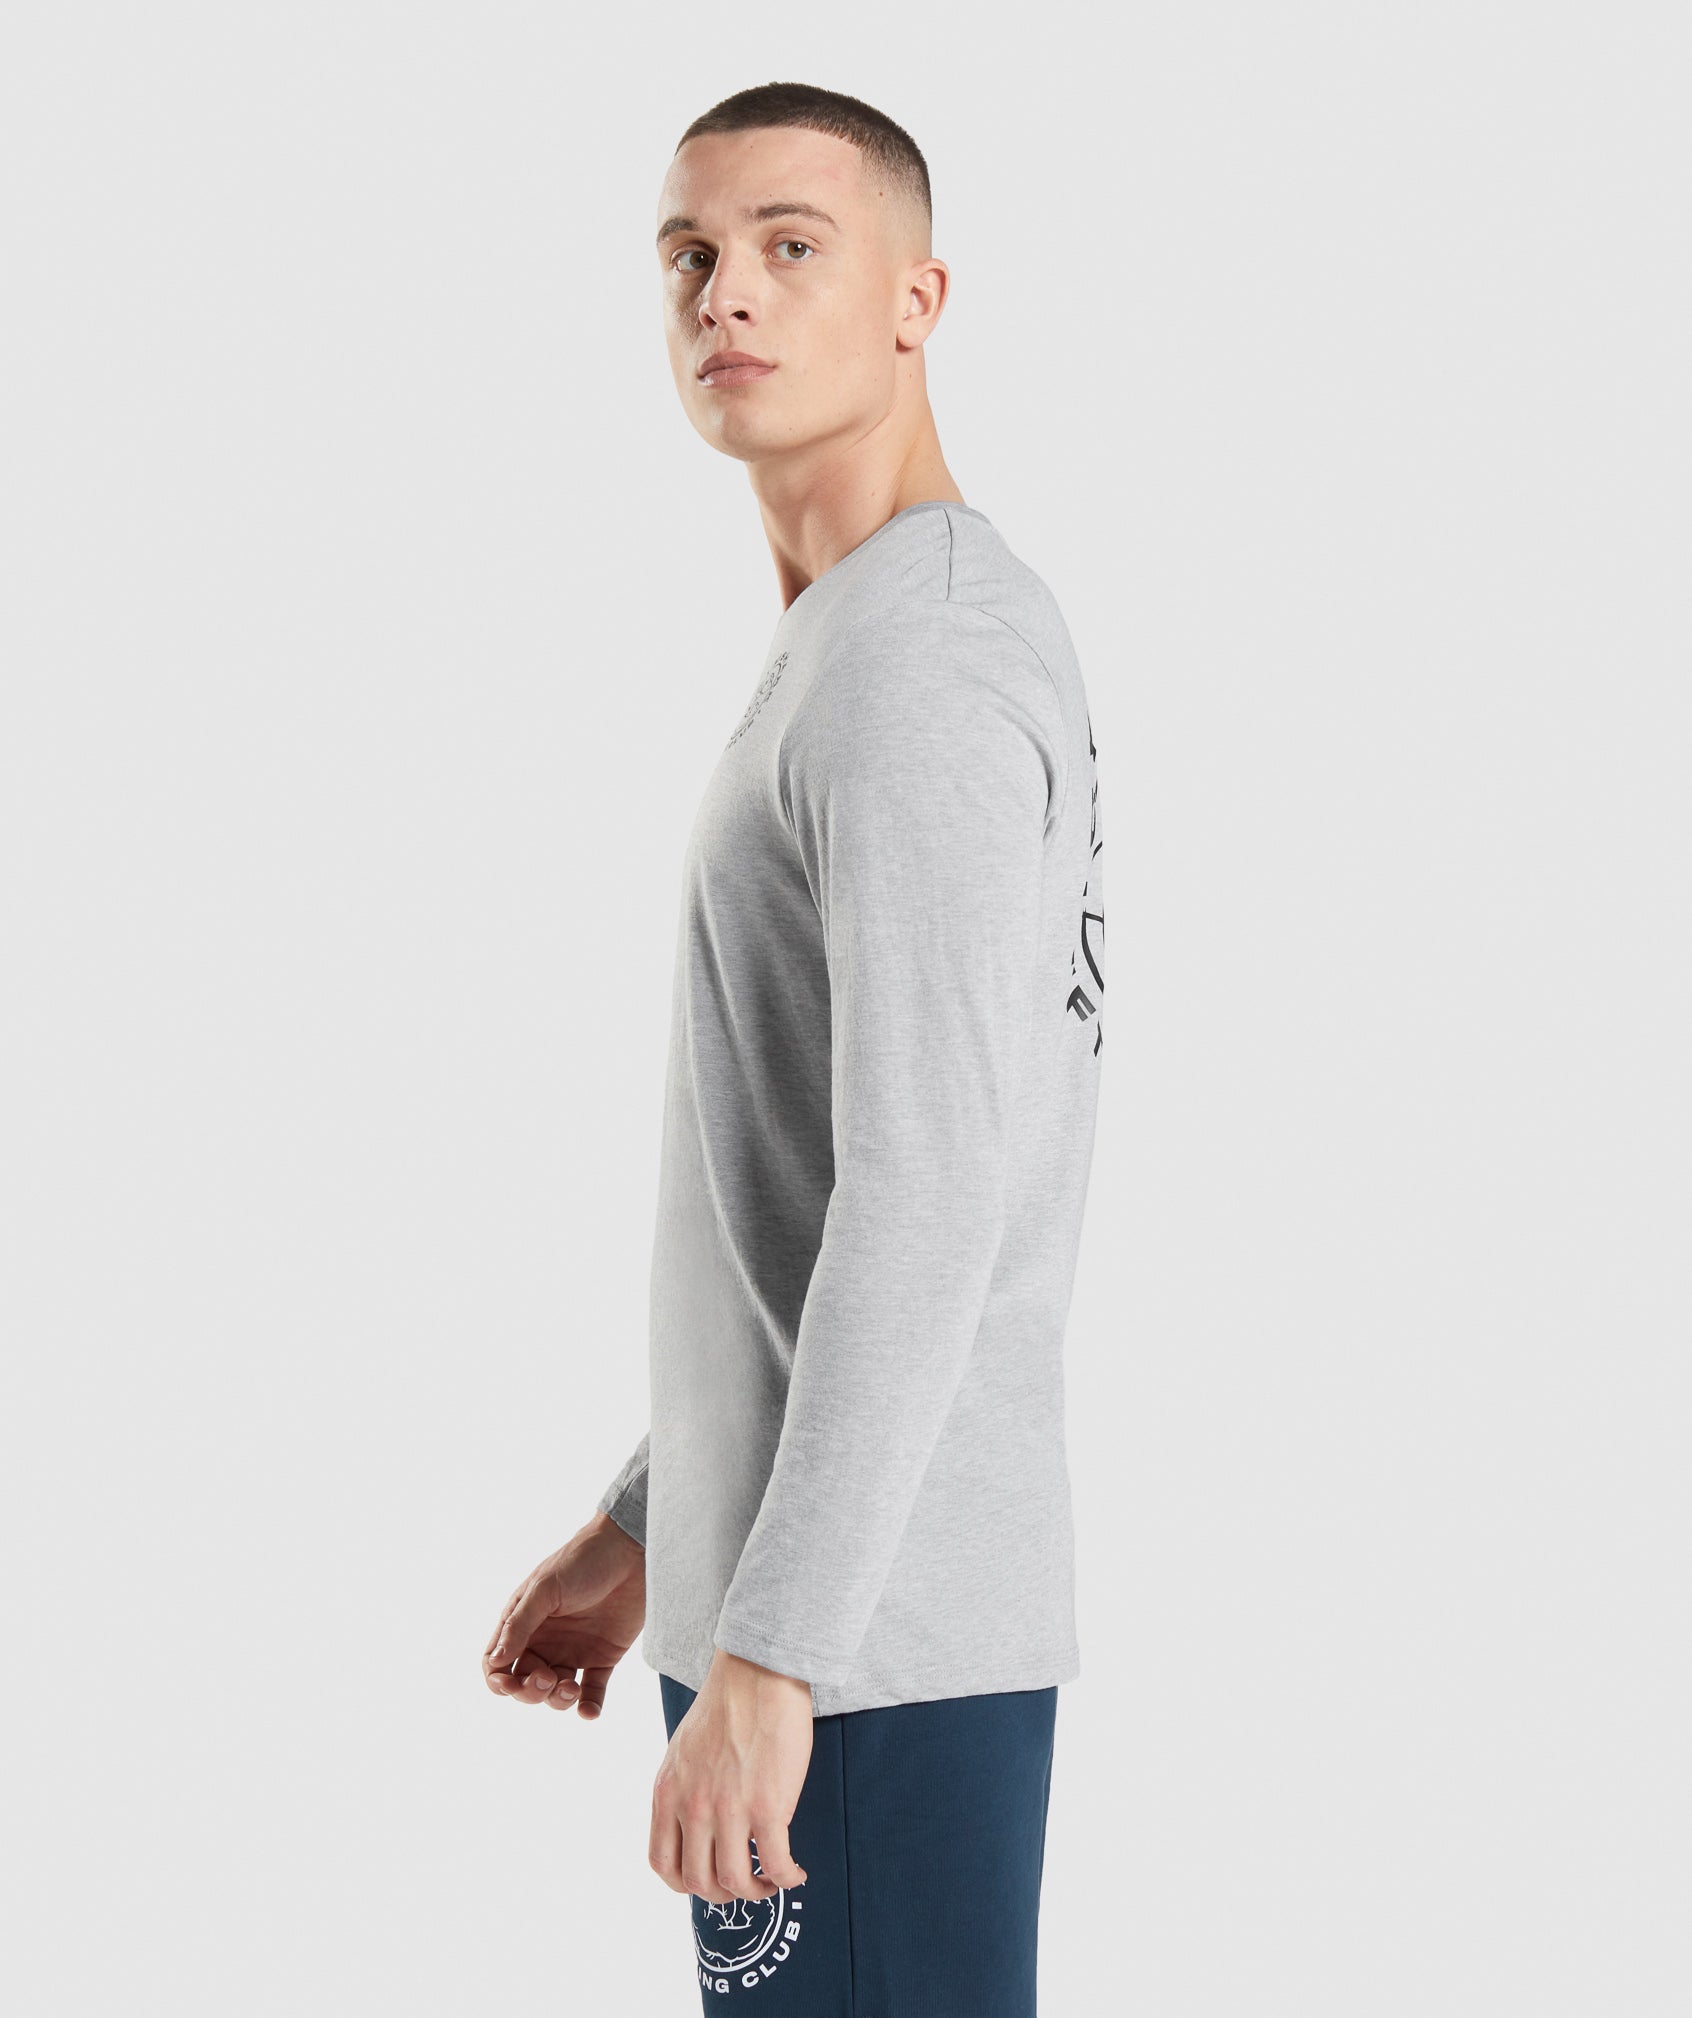 Legacy Long Sleeve T-Shirt in Light Grey Core Marl - view 3